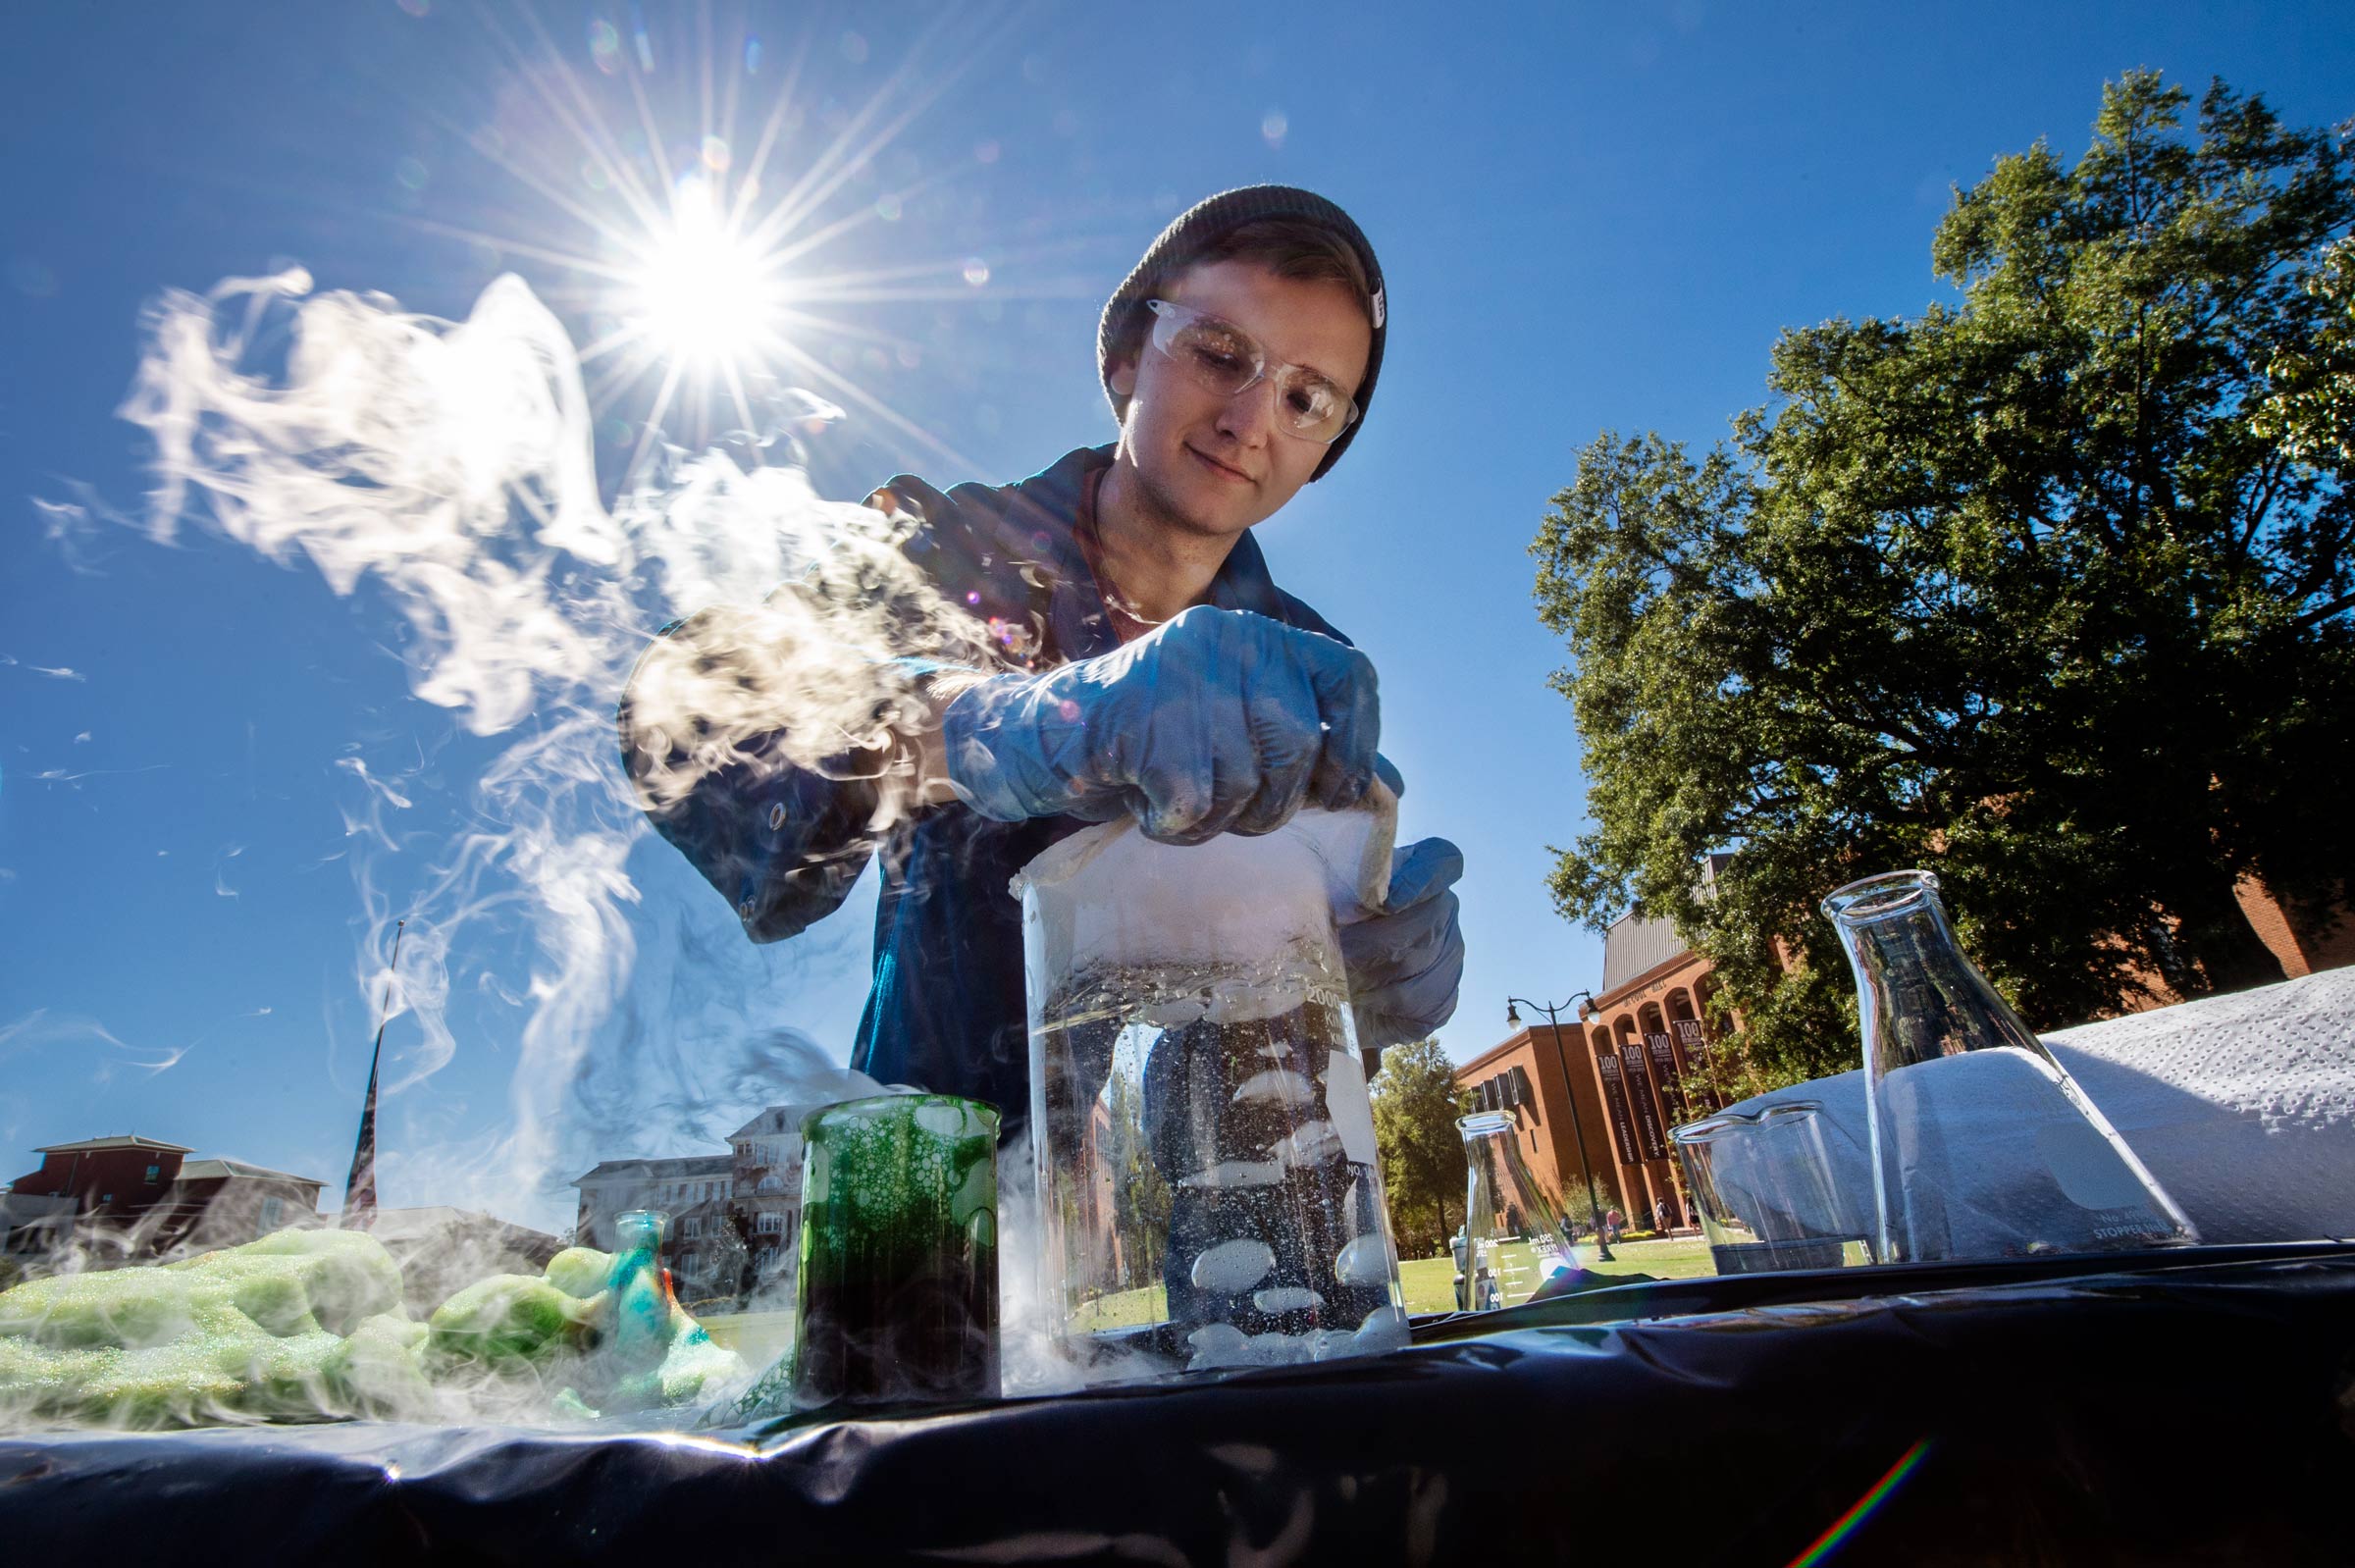 Student Hayden Davis works with beakers of liquid bubbling on Drill Field demonstration table, with sunflare behind.